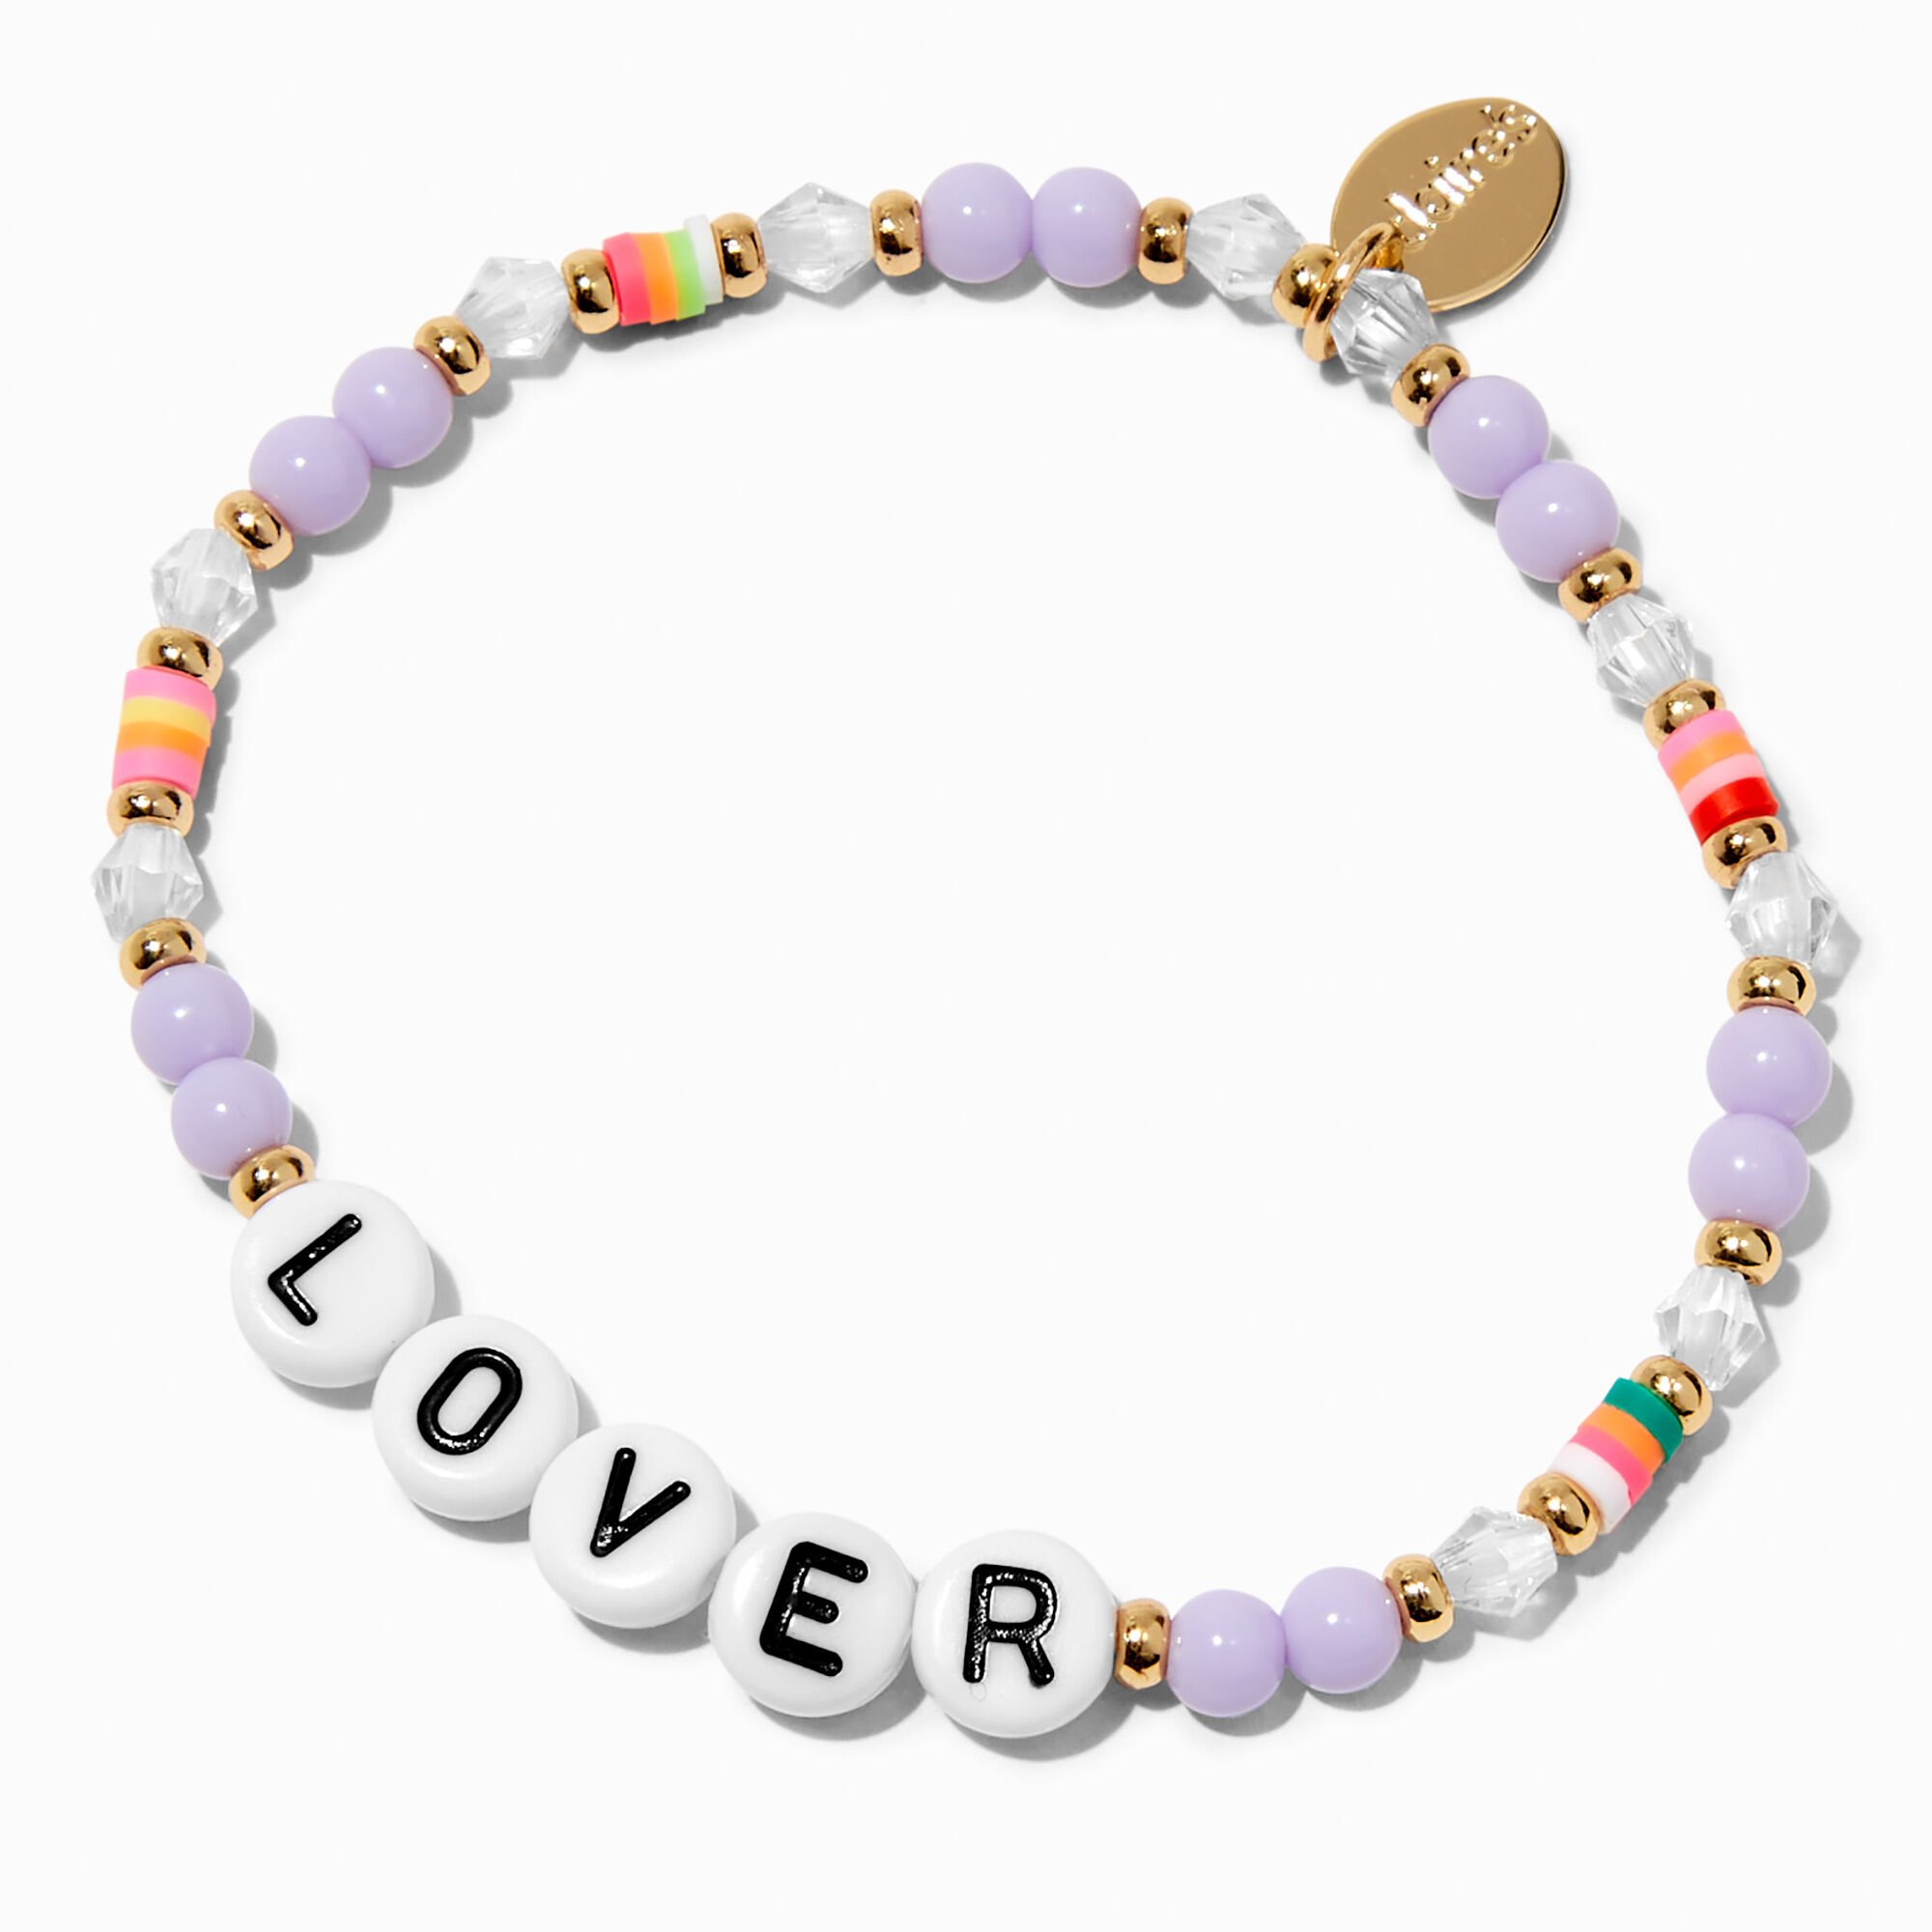 View Claires lover Beaded Stretch Bracelet Gold information